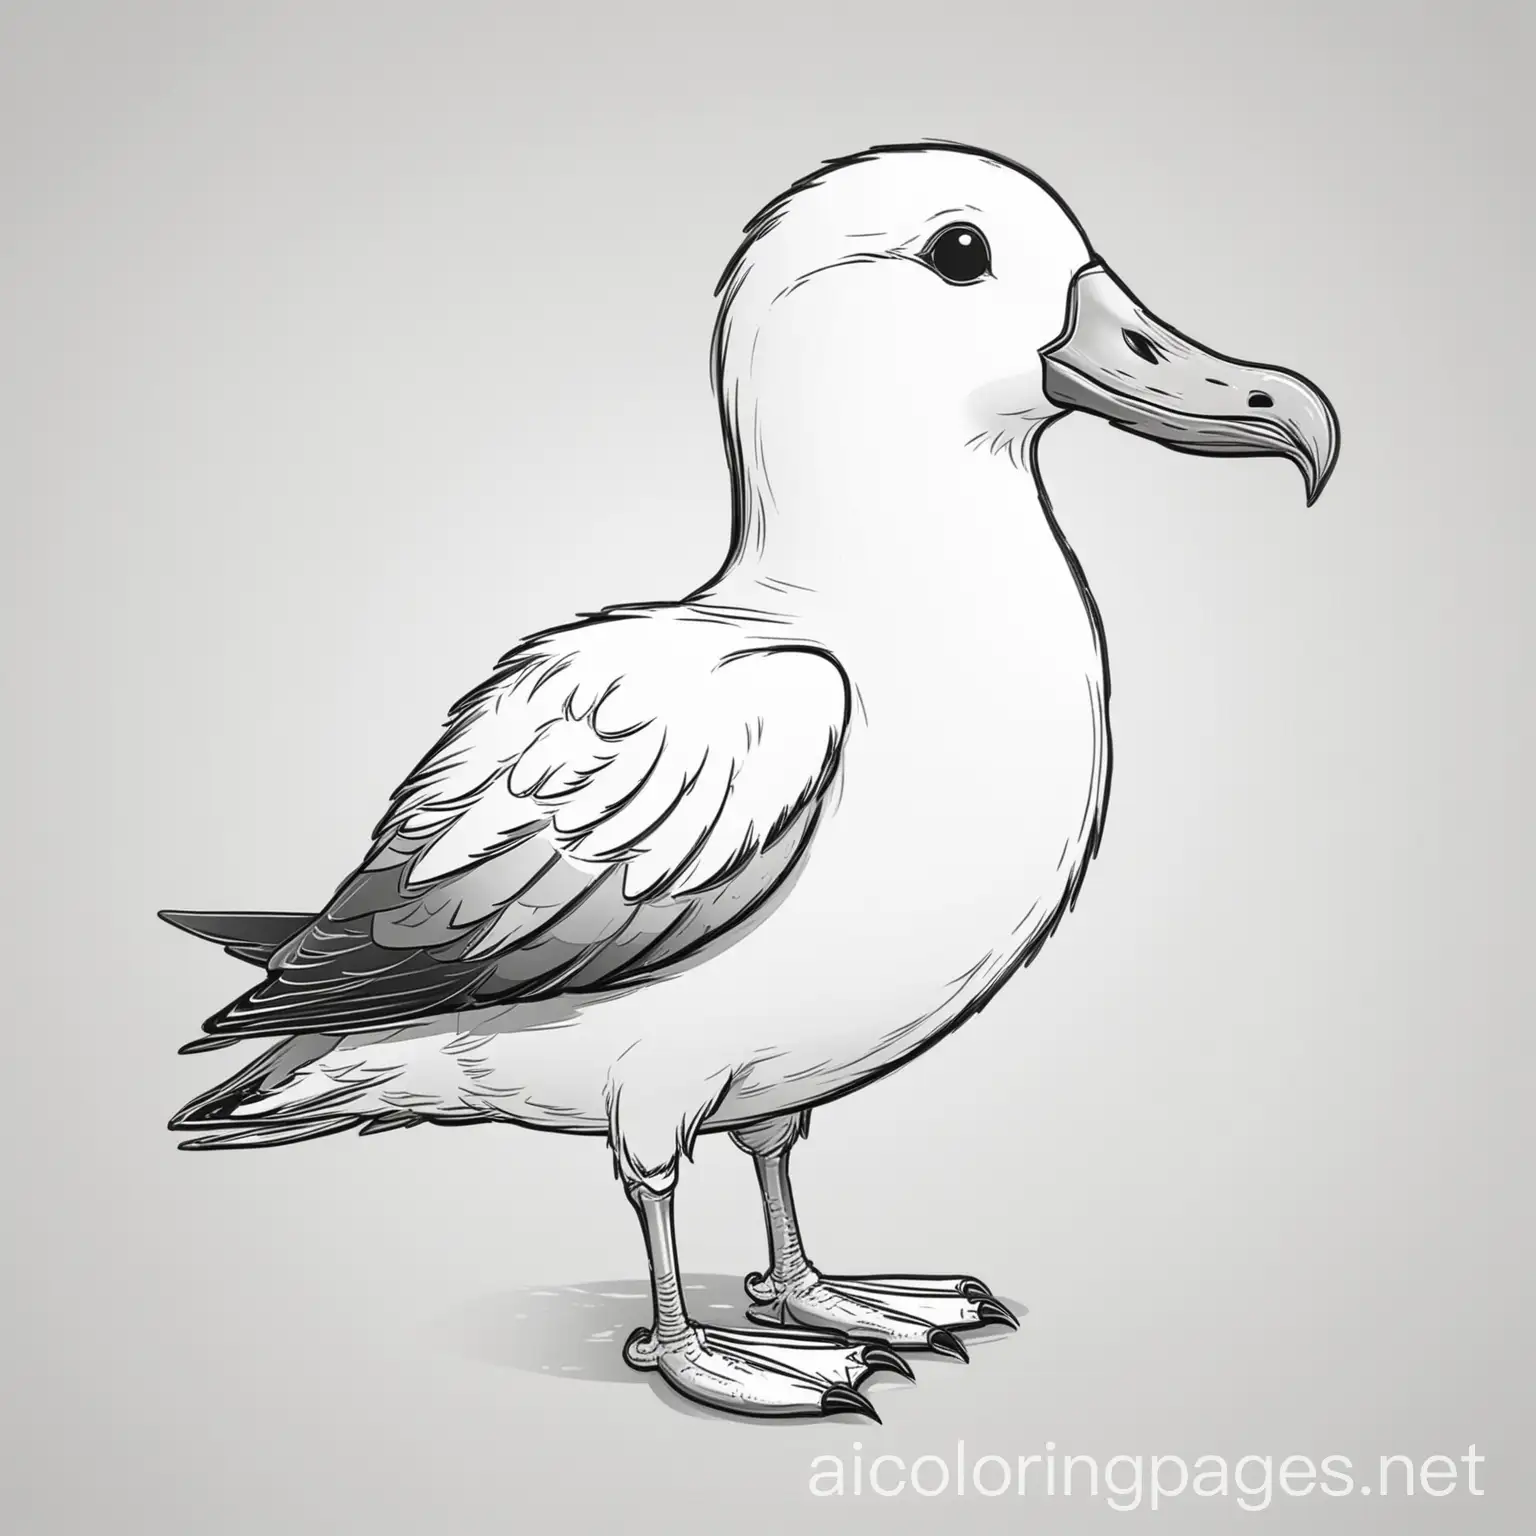 Albatross cartoon character, Coloring Page, black and white, line art, white background, Simplicity, Ample White Space. The background of the coloring page is plain white to make it easy for young children to color within the lines. The outlines of all the subjects are easy to distinguish, making it simple for kids to color without too much difficulty